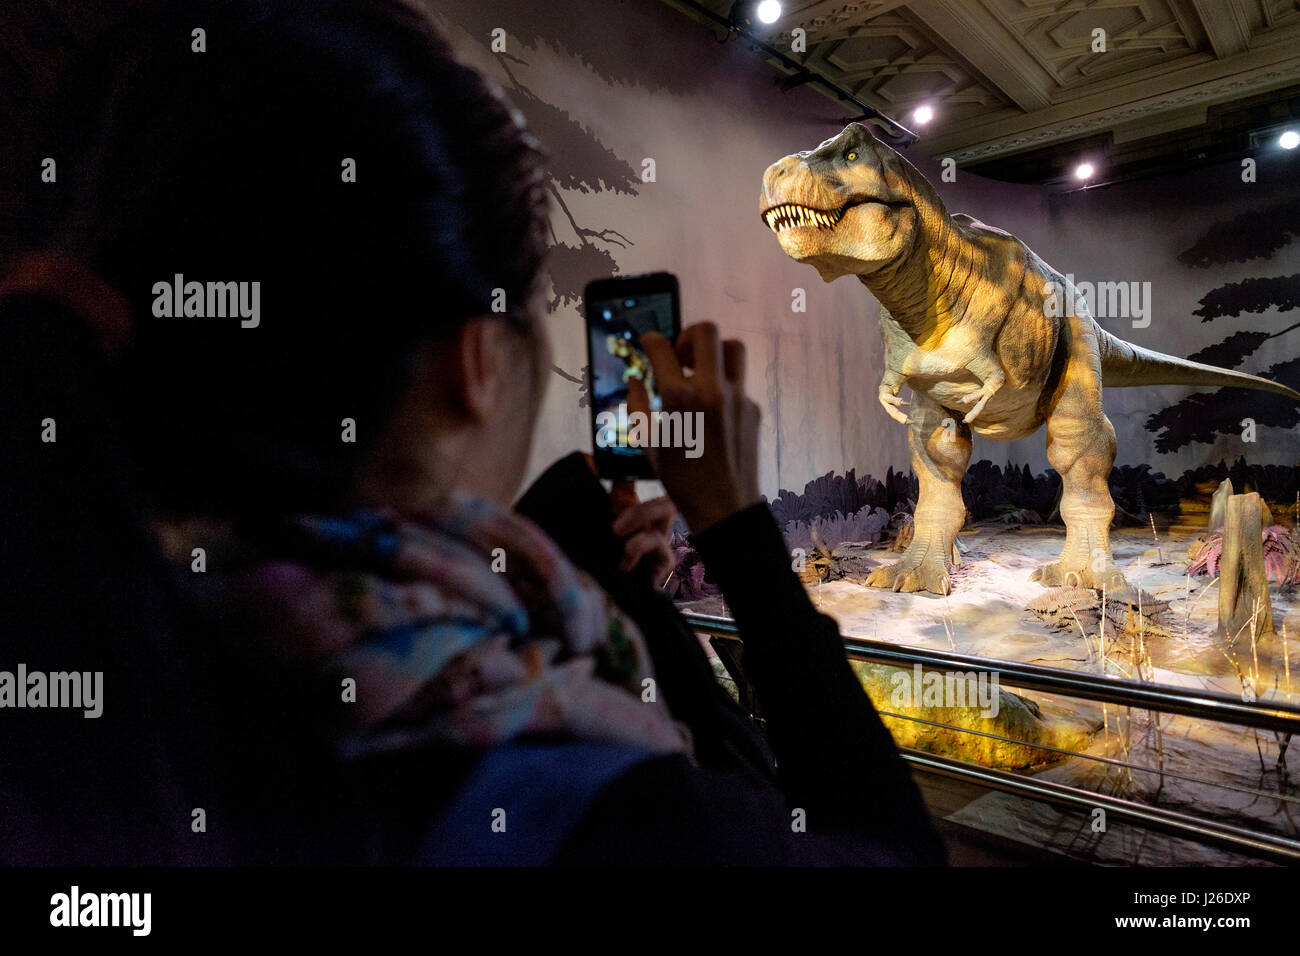 Woman taking a picture of an animatronic T-Rex dinossaur with her smartphone at the Natural History Museum in London, England, UK, Europe Stock Photo